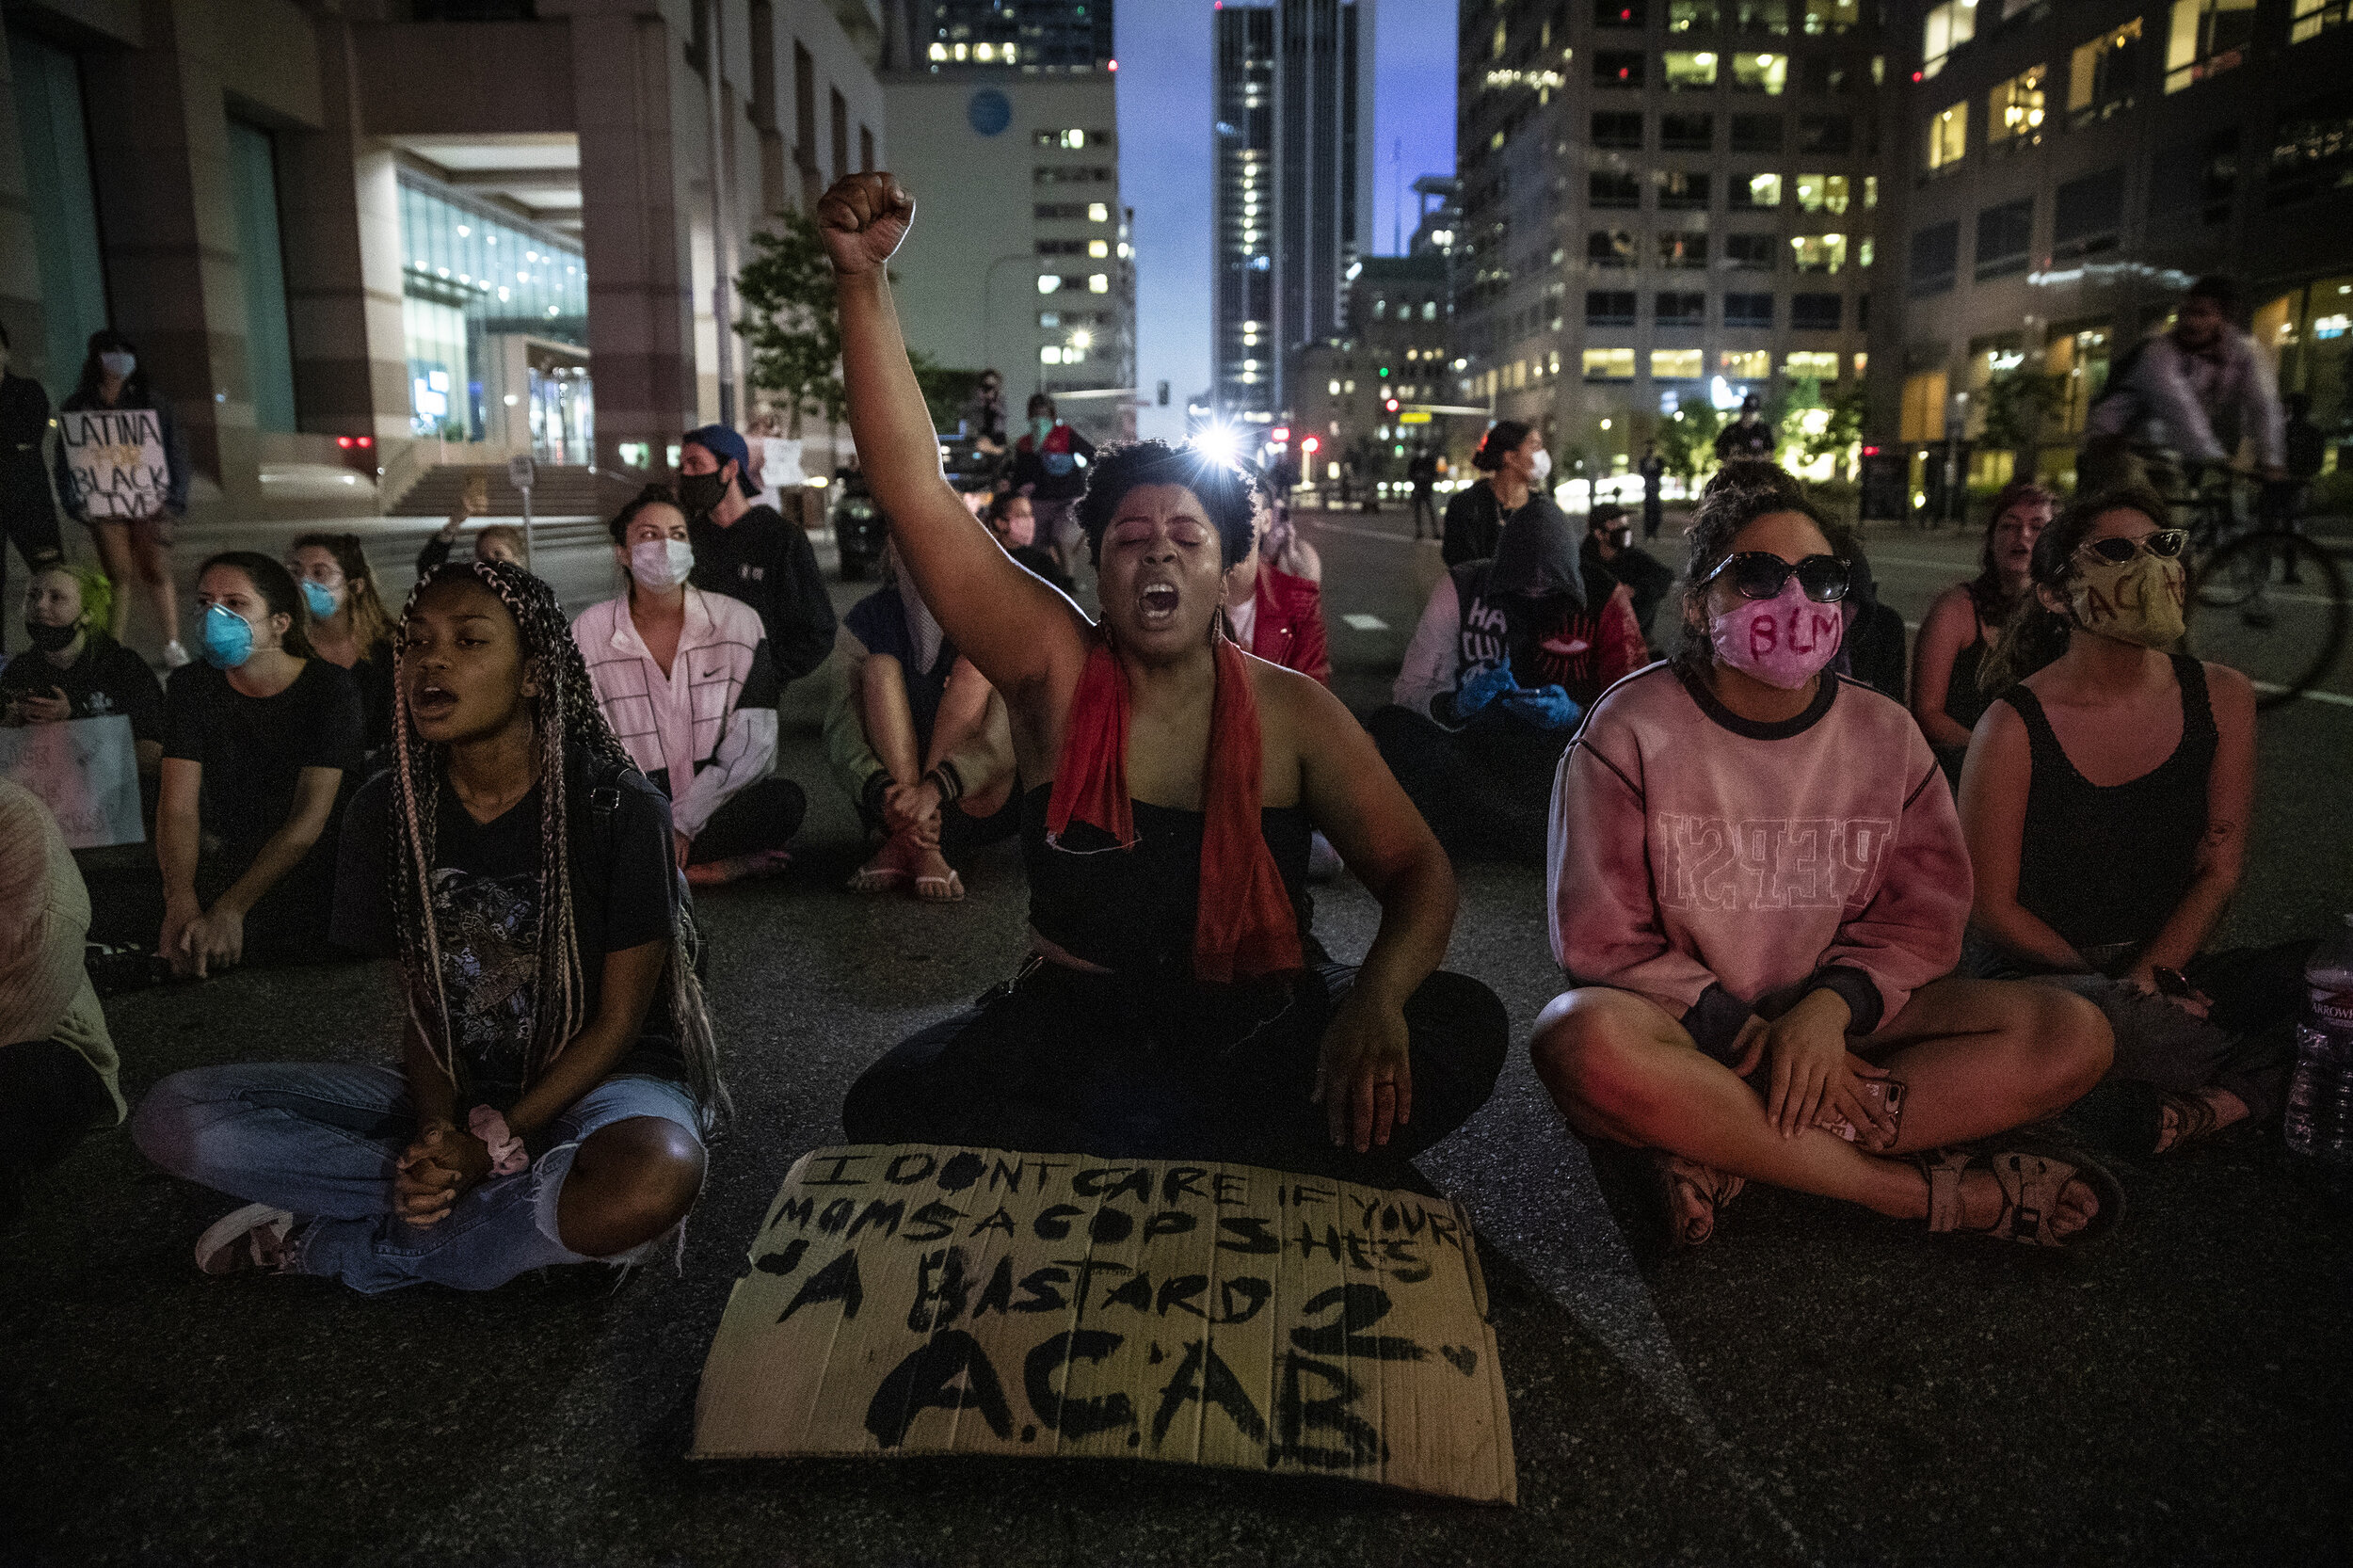  Elyssa Wells yells out protesting the death of George Floyd as she sits with others on Grand Ave., downtown Los Angeles, June 28, defying police orders to leave the area.  The group finally dispersed after LAPD officers moved to clear the streets. A